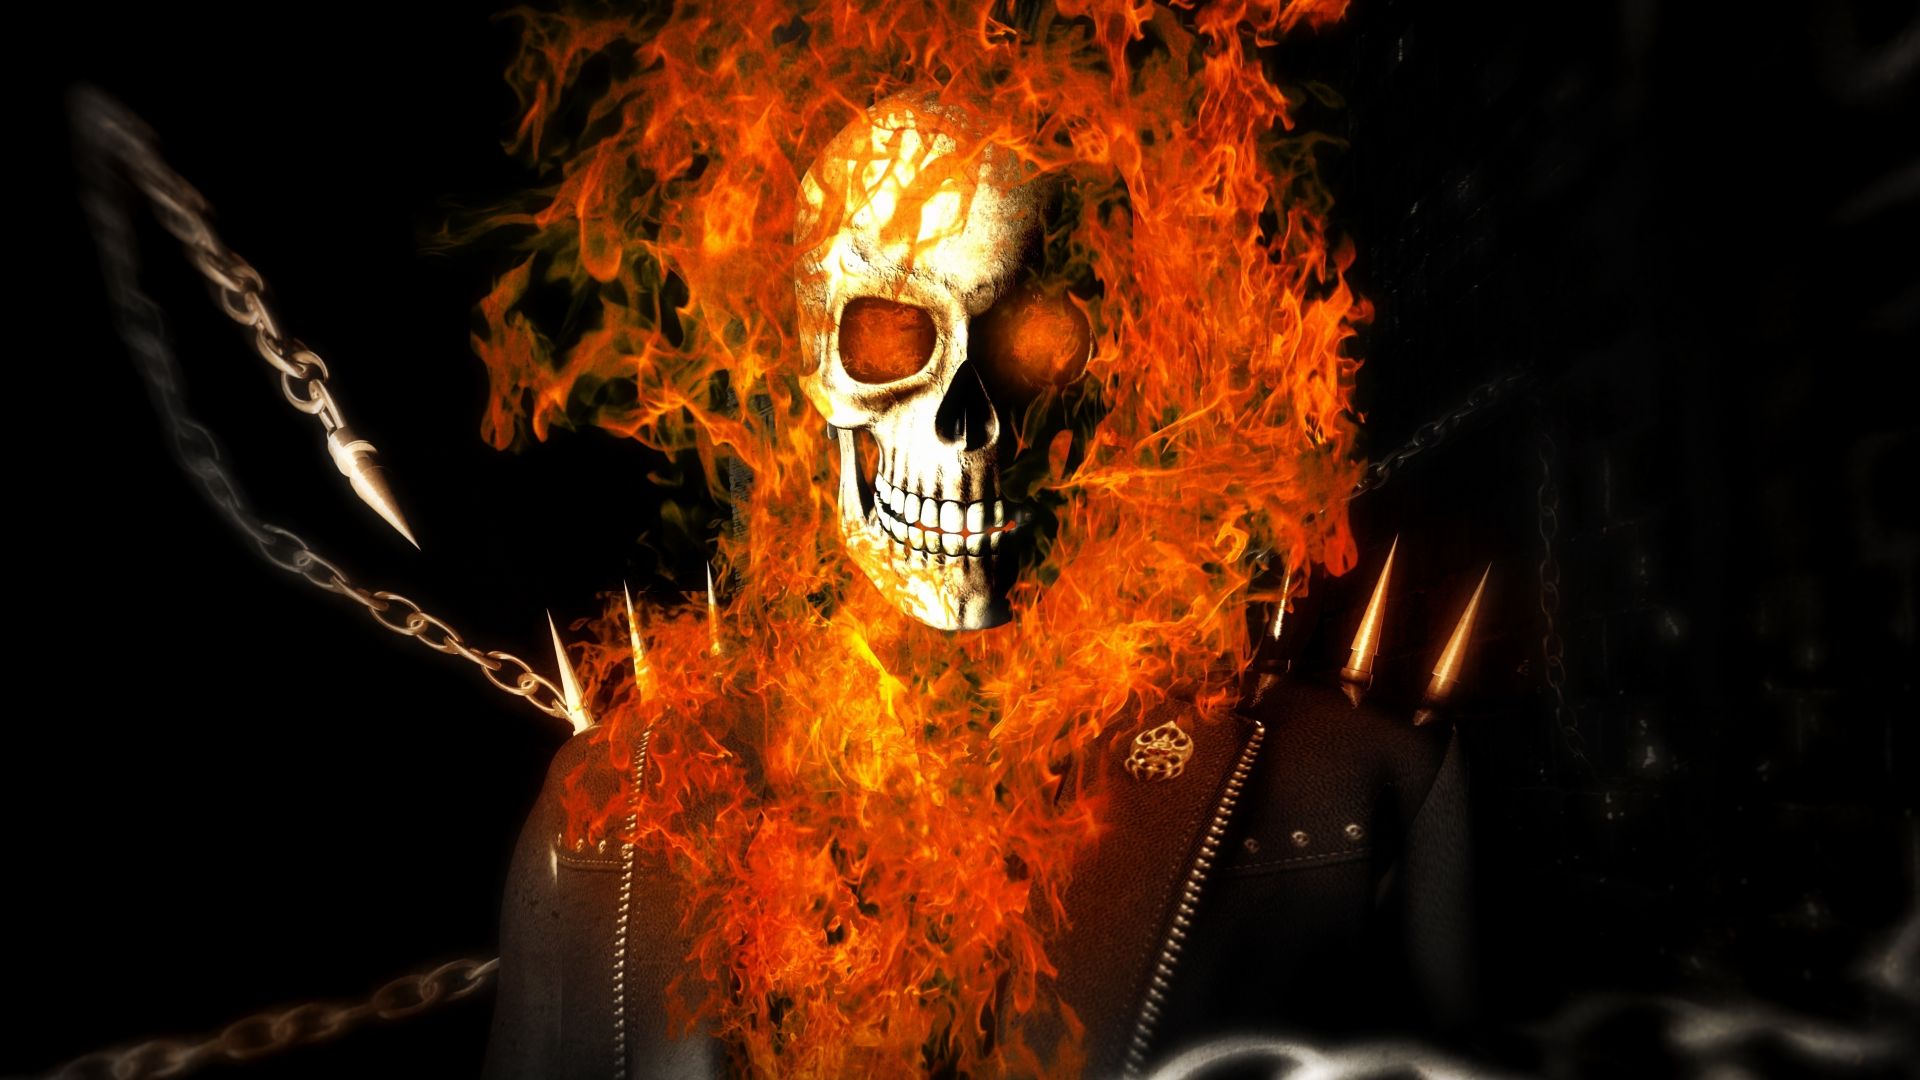 Desktop wallpaper skull and fire, ghost rider, superhero, HD image, picture, background, 044d91